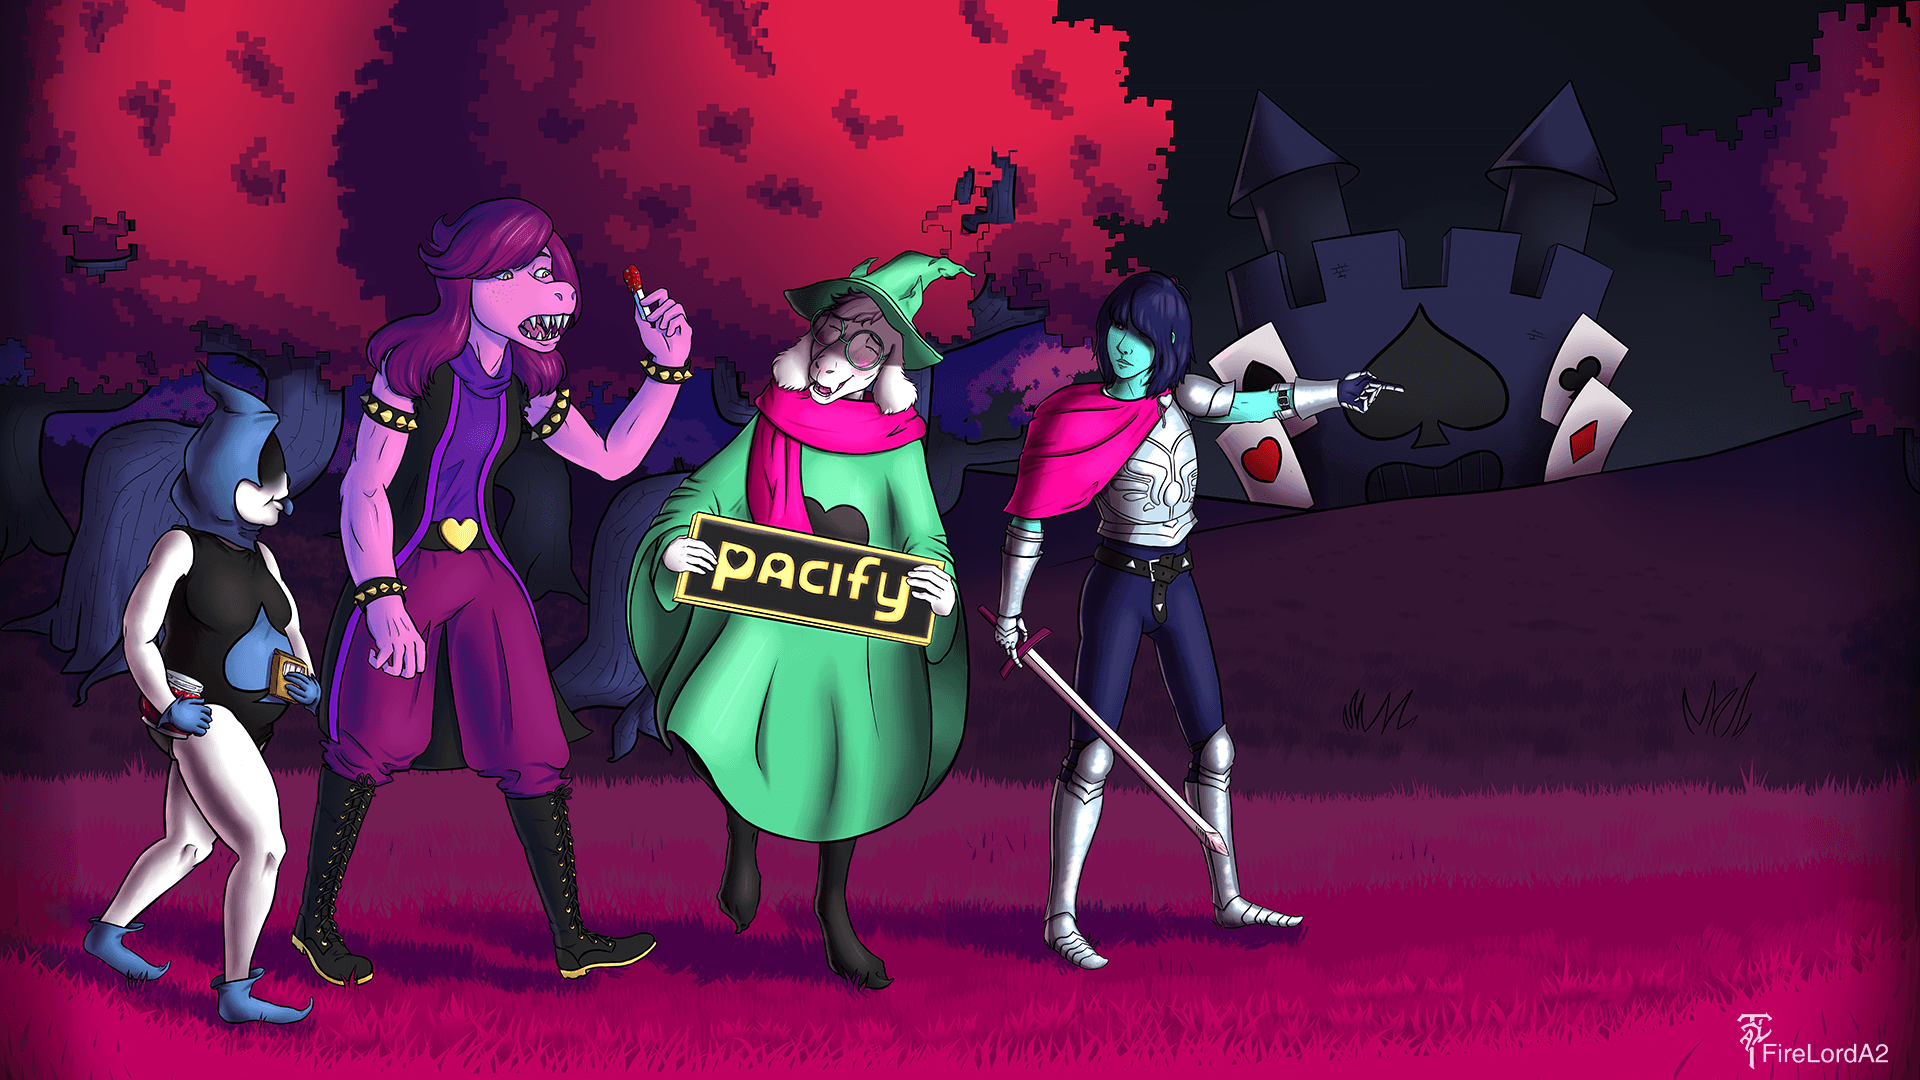 Done with my Deltarune Poster artwork (this isn't the original, but have the desktop wallpaper 1080p one) follow on instagram cowled_chaperone